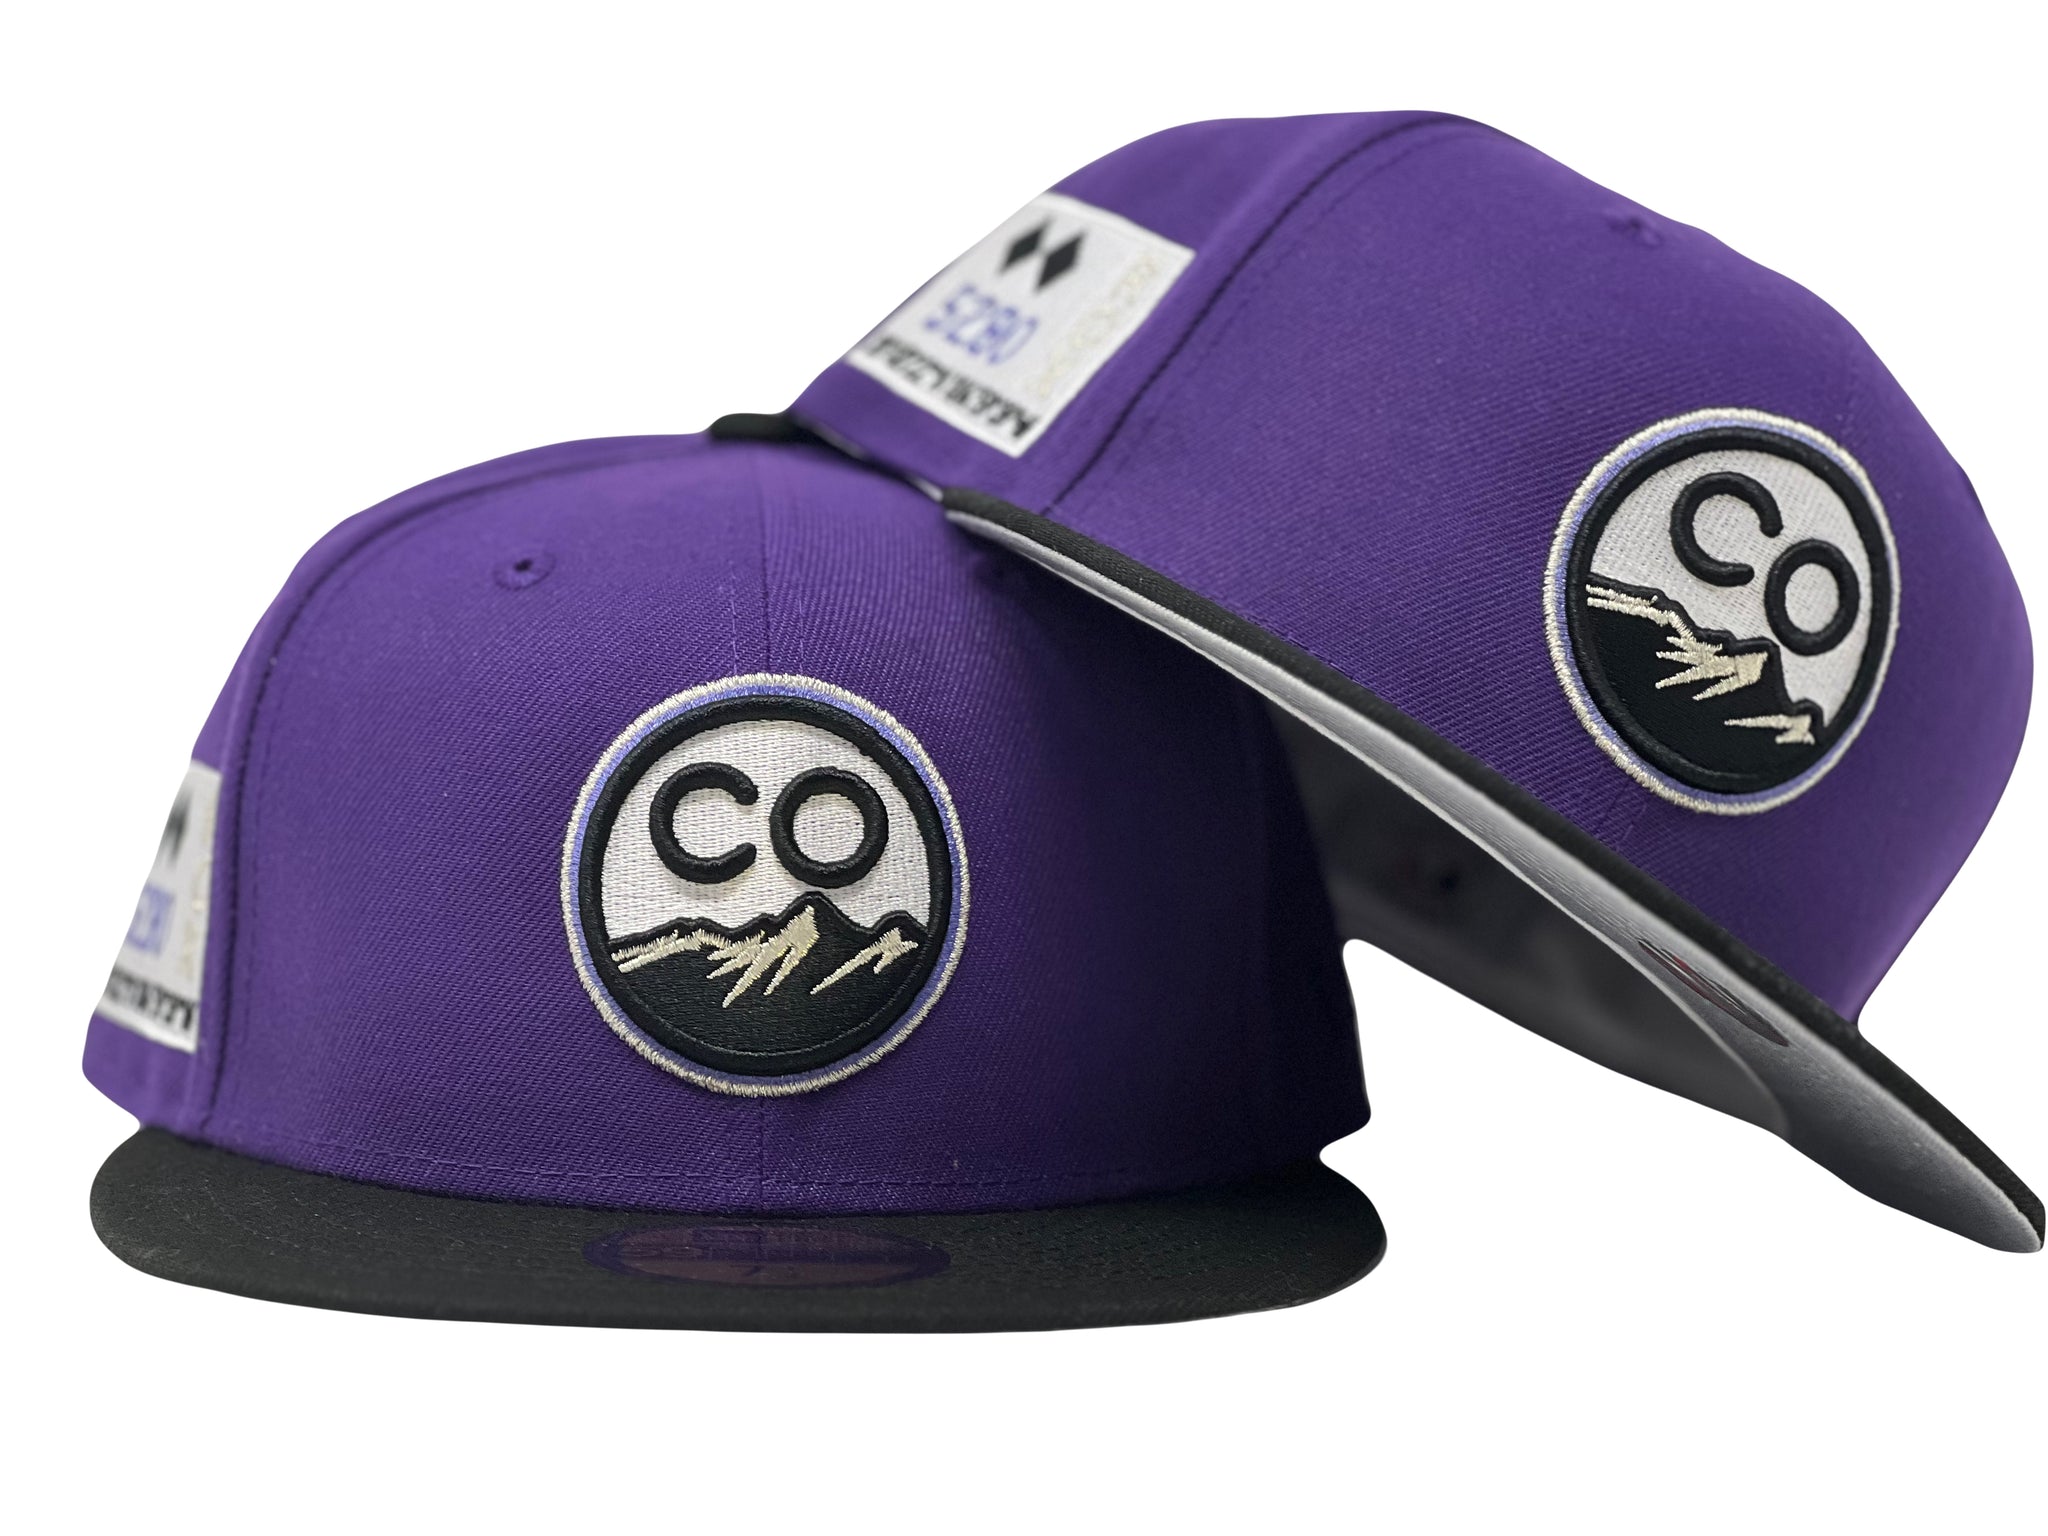 Colorado Rockies CITY CONNECT ONFIELD Hat by New Era